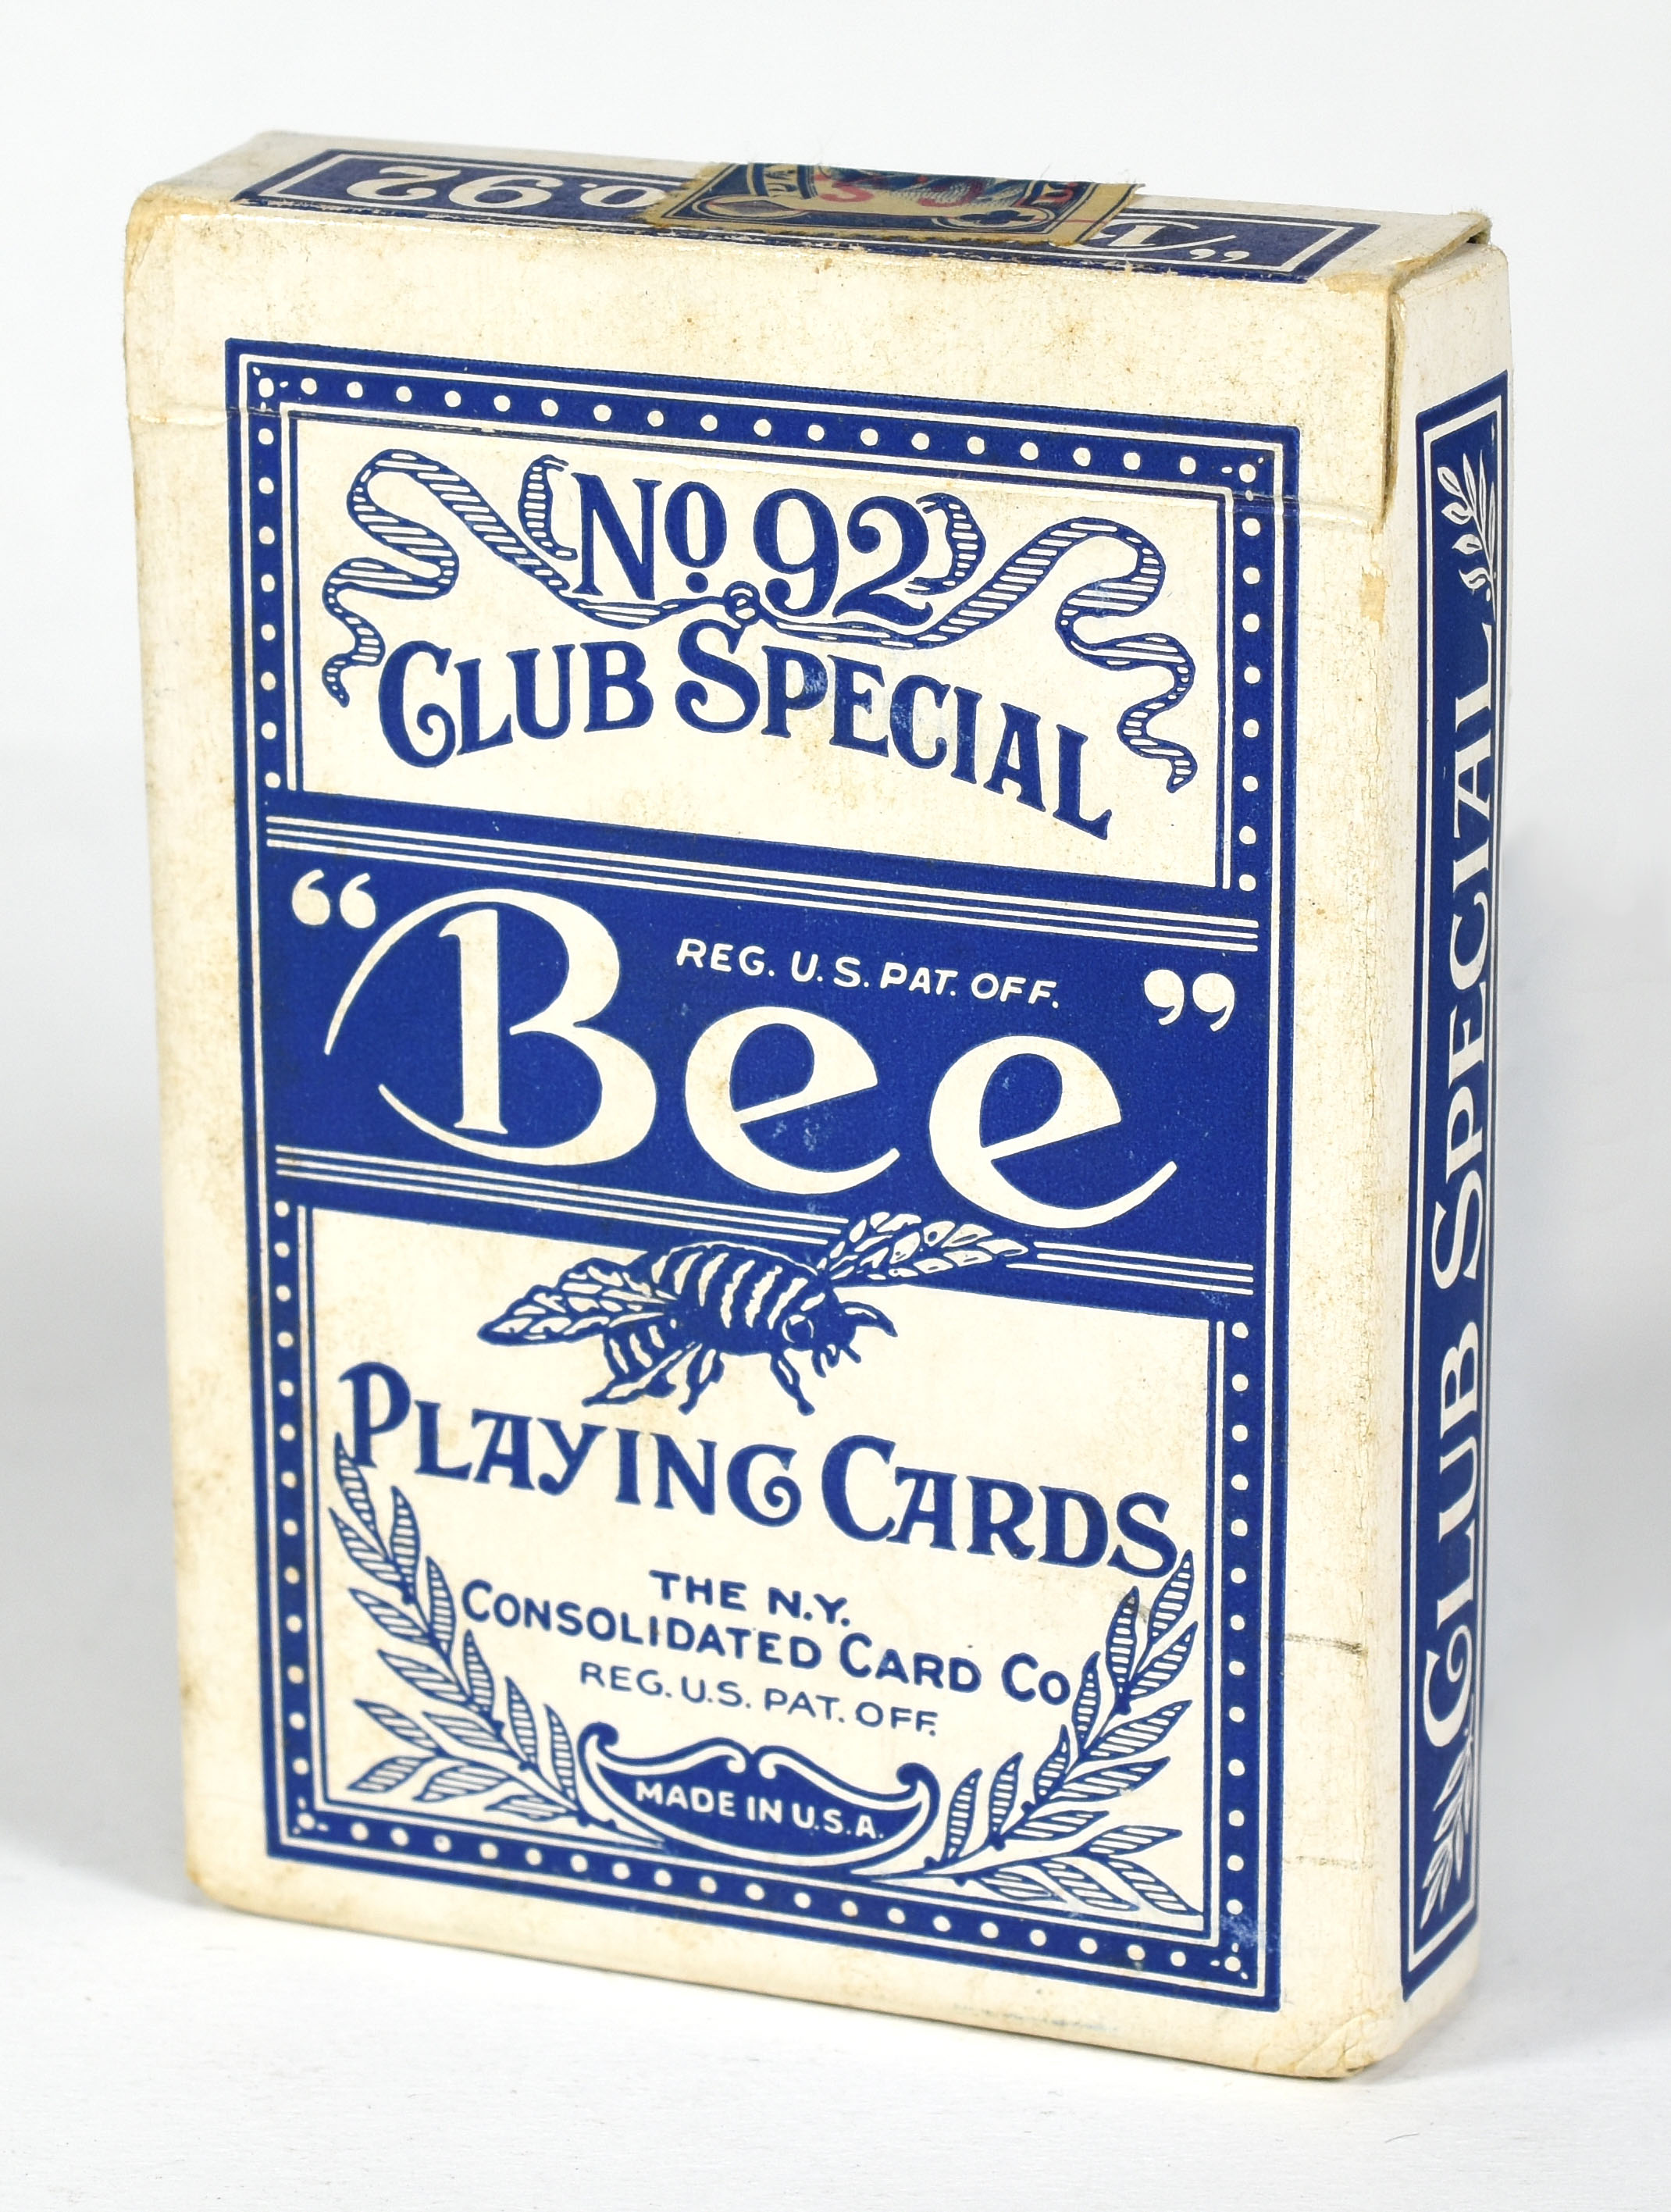 8 Decks of Bee No 92 Club Special Playing Cards Back No 67 